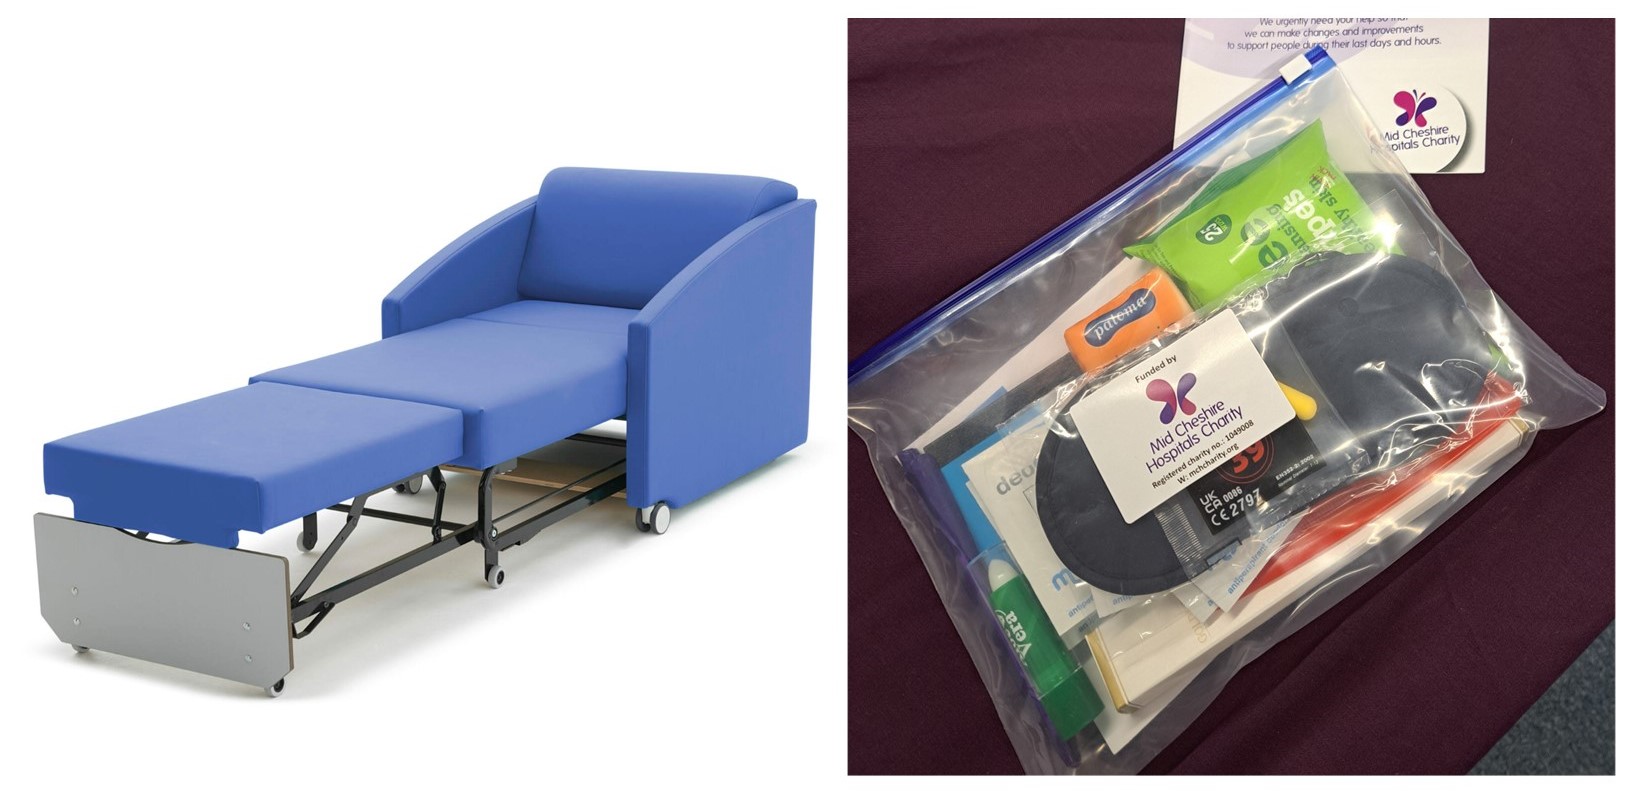 Sleeper chairs and comfort packs make a world of difference for people staying with loved ones at the end of life